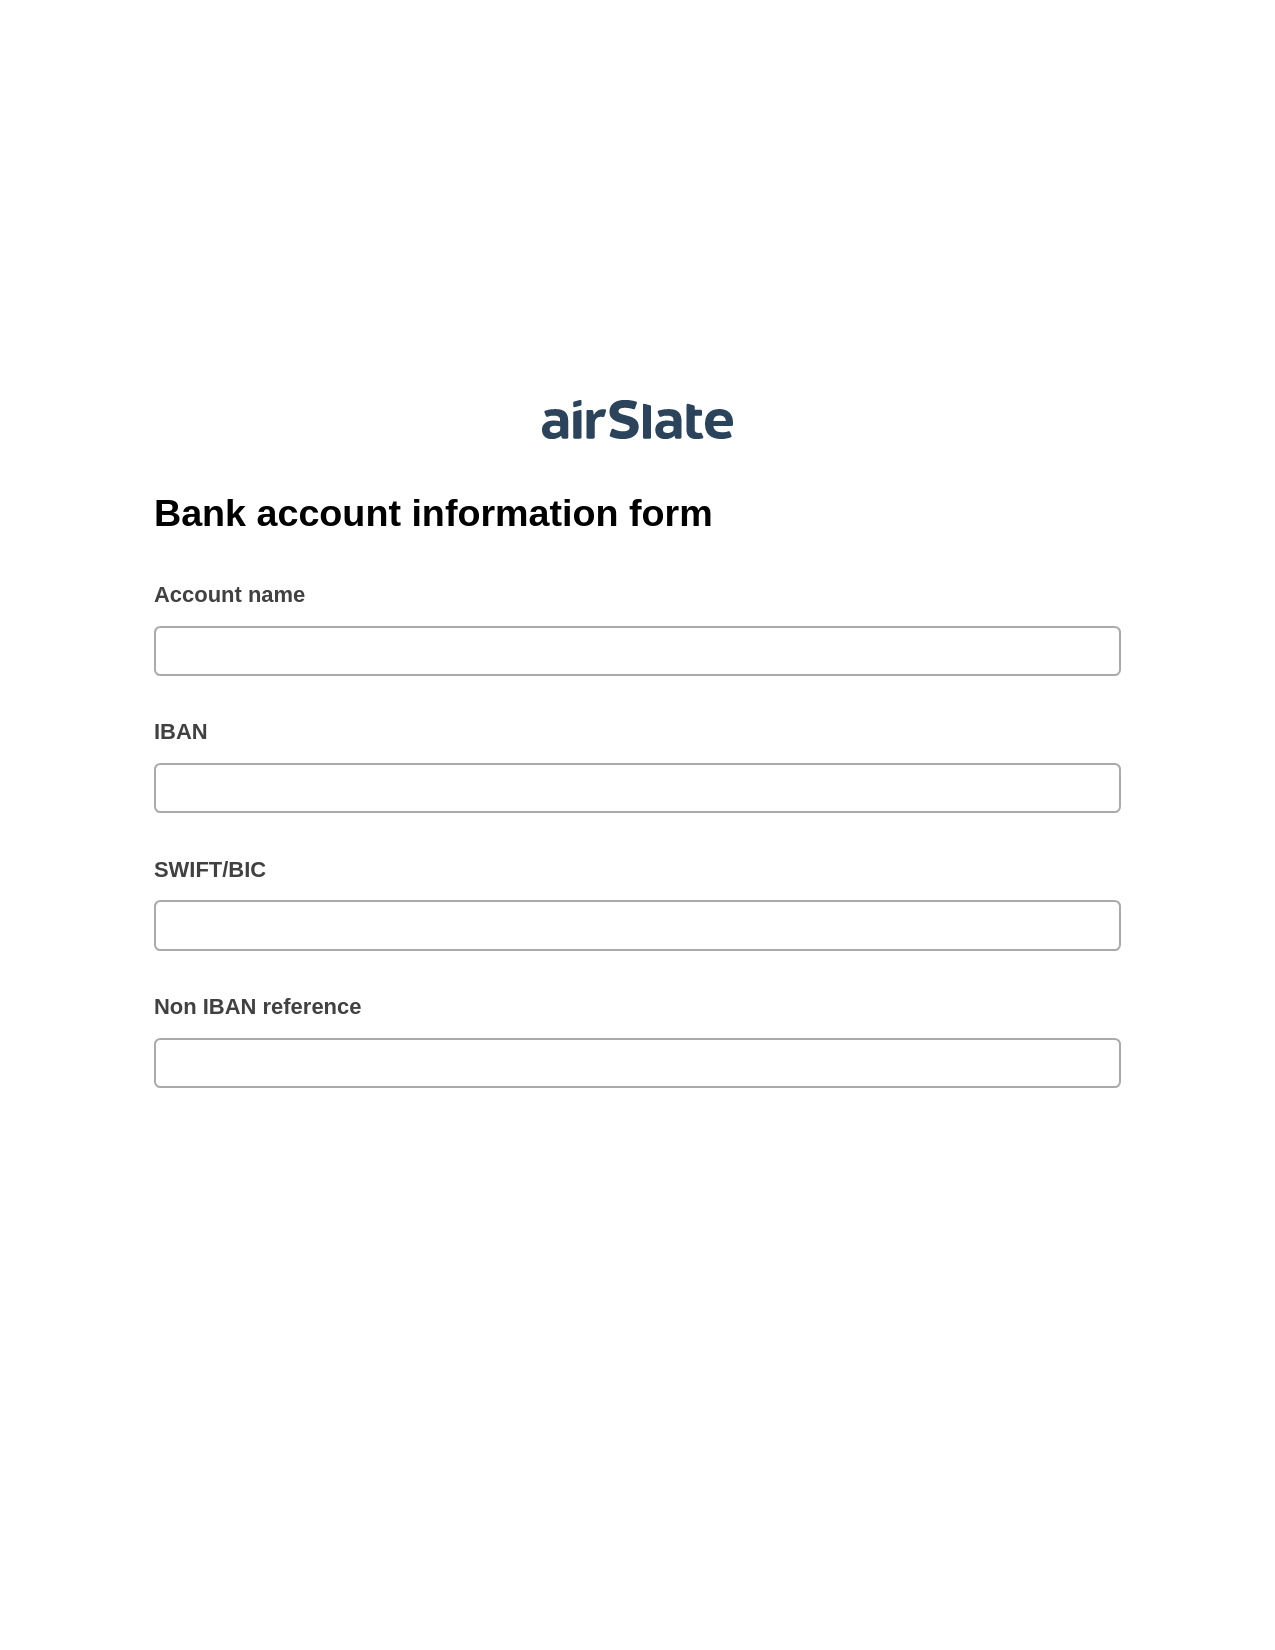 Bank account information form Pre-fill from Excel Spreadsheet Dropdown Options Bot, Unassign Role Bot, Webhook Postfinish Bot